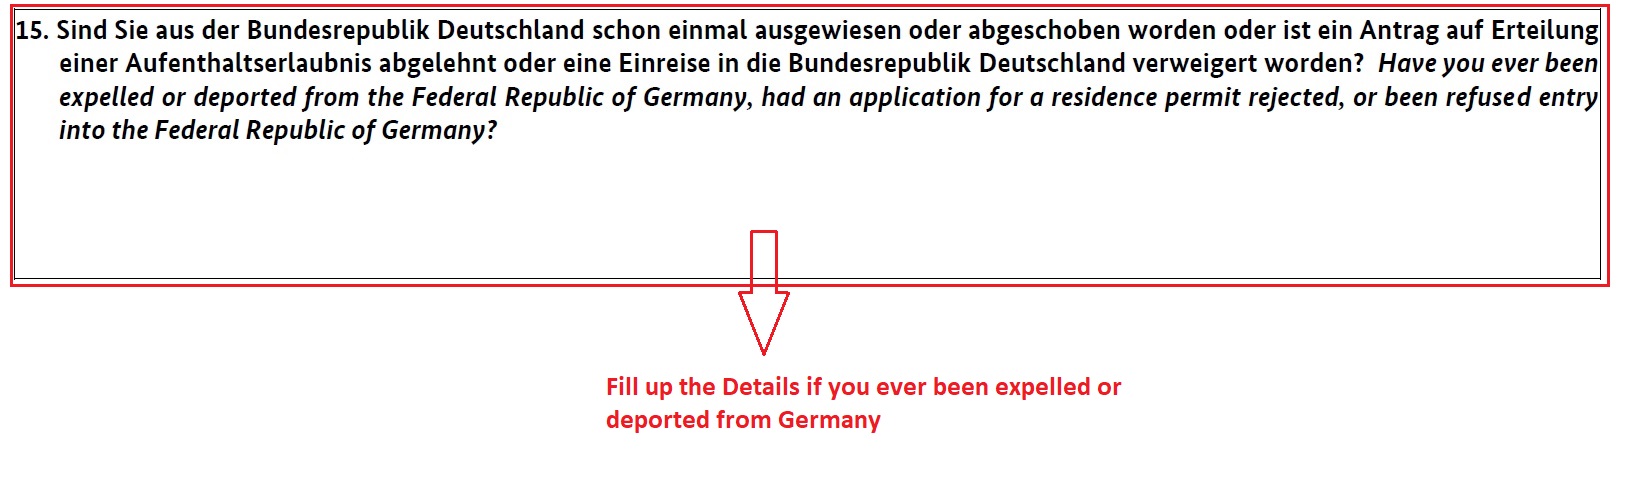 How to fill German National Visa Application Form planforgermany.com